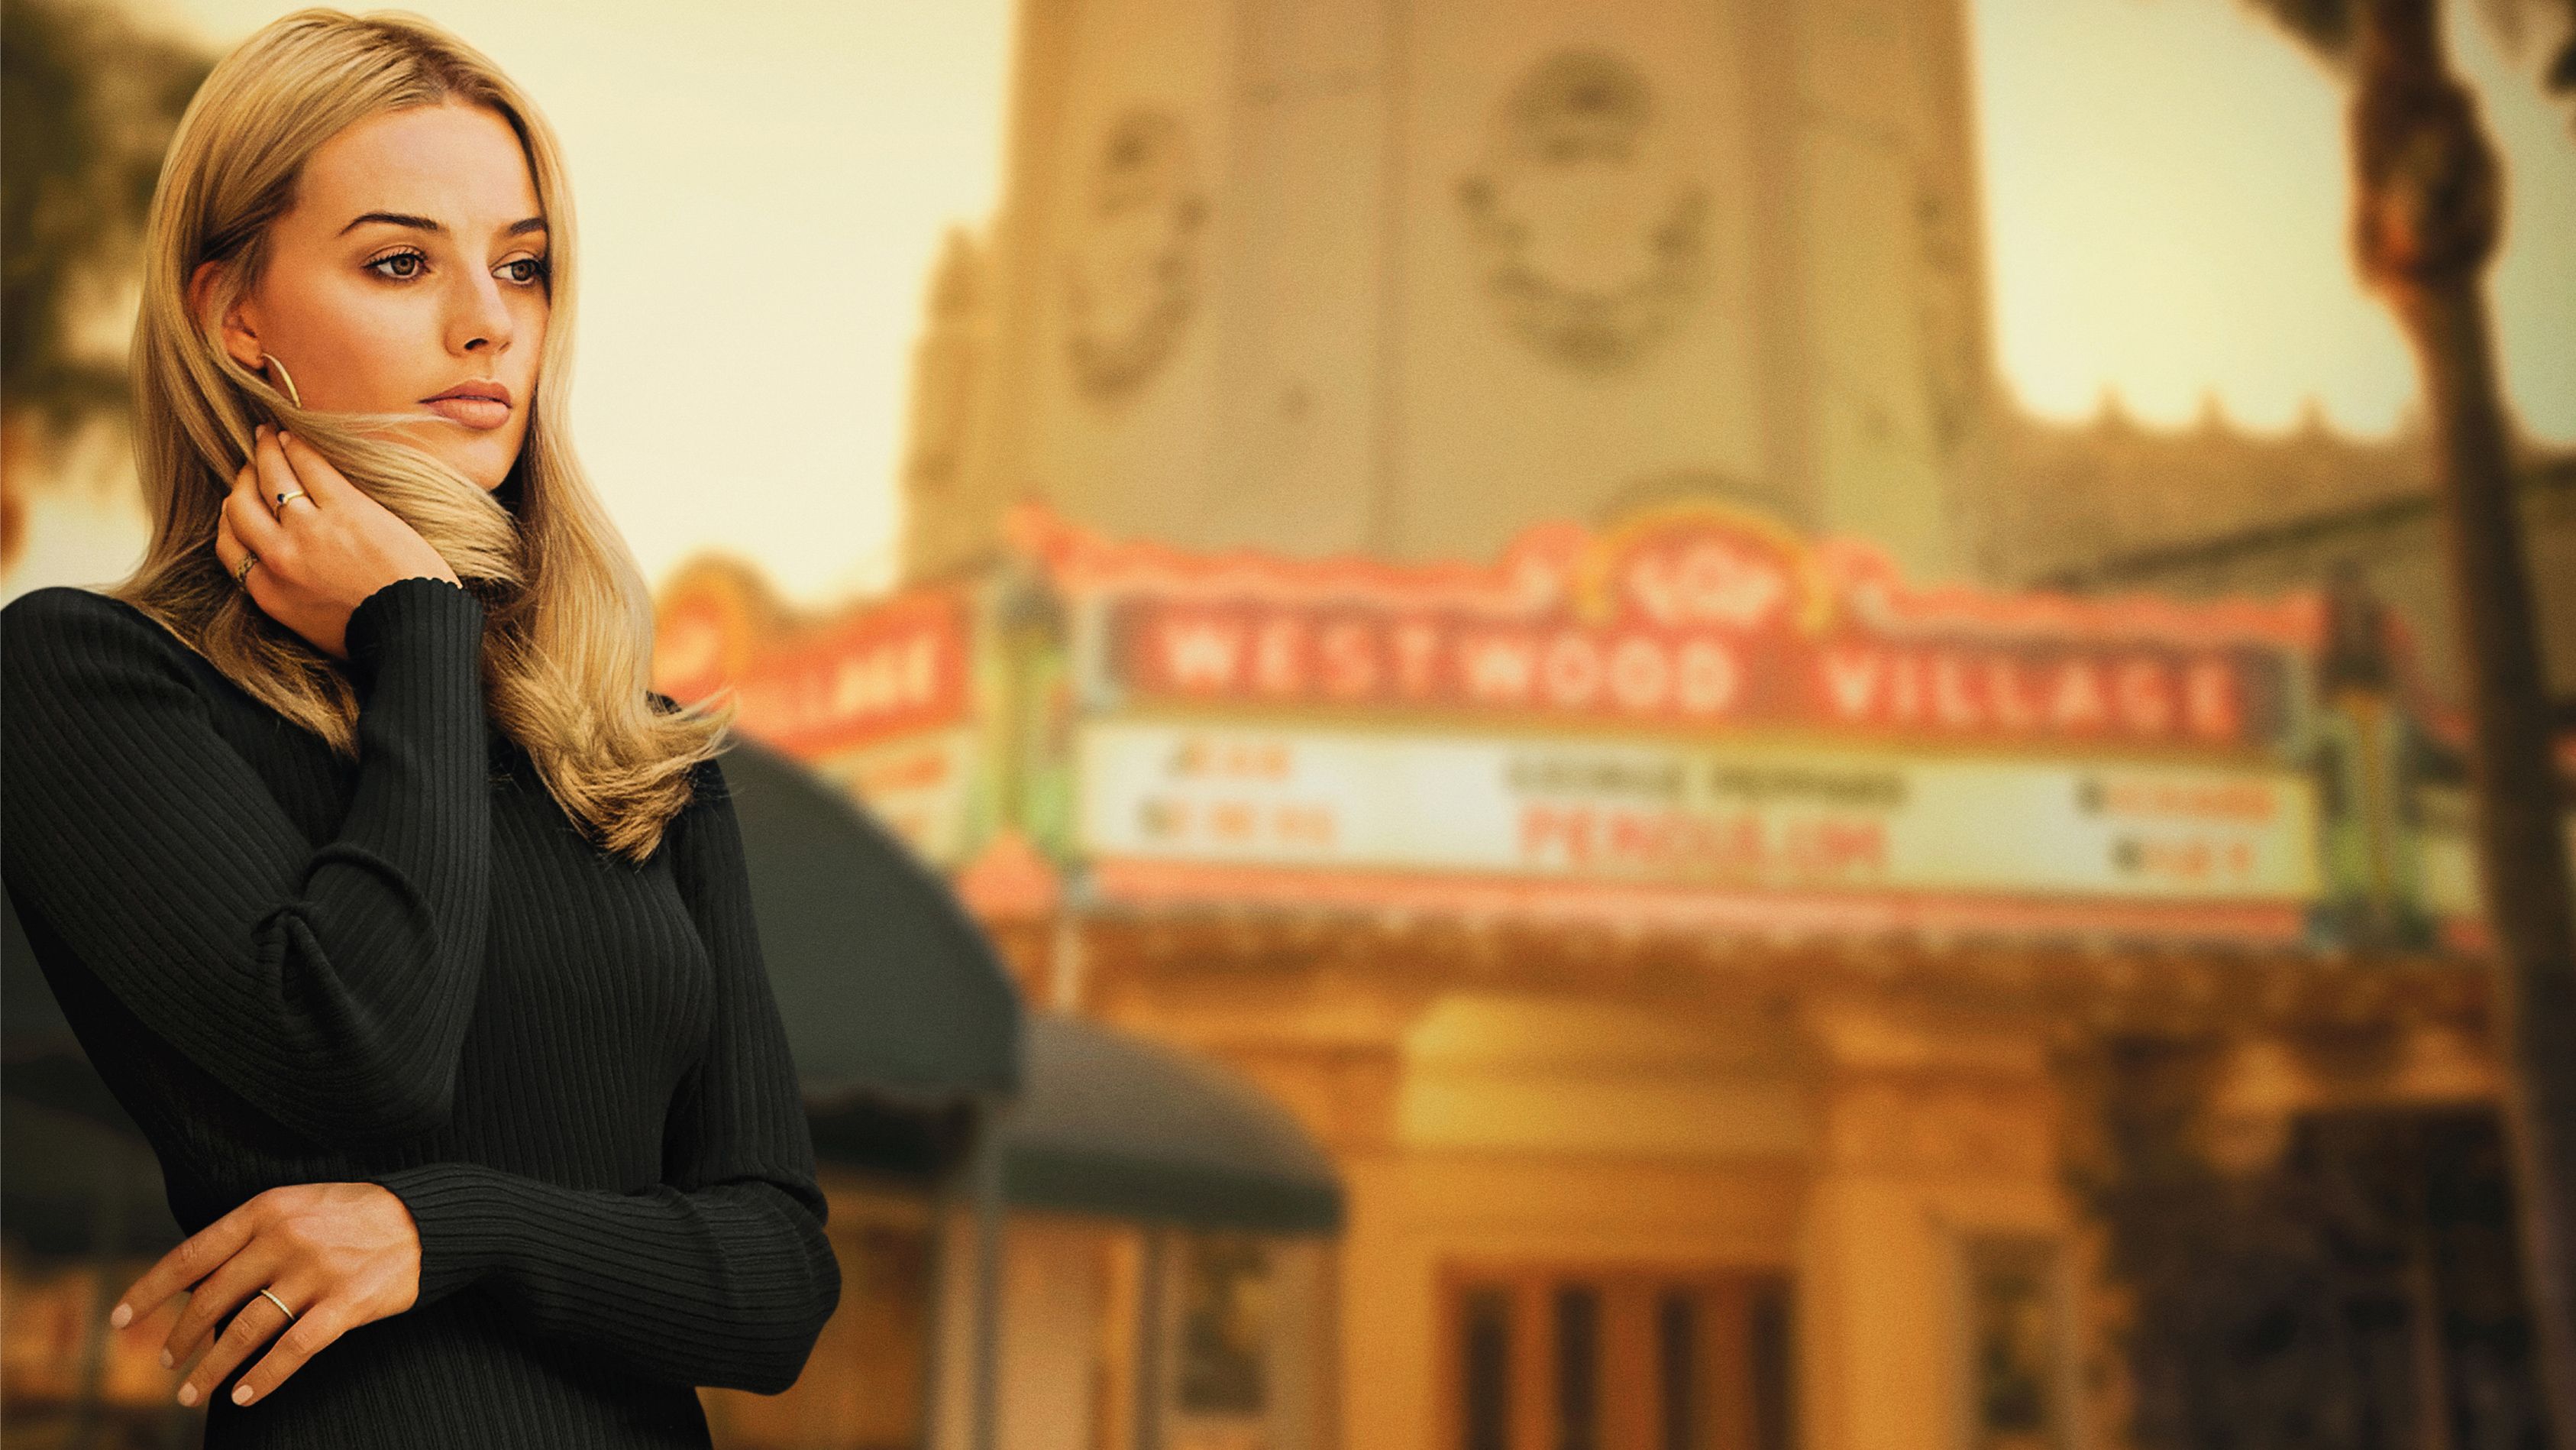 Margot Robbie Once Upon A Time In Hollywood 2019 4k, HD Movies, 4k Wallpaper, Image, Background, Photo and Picture